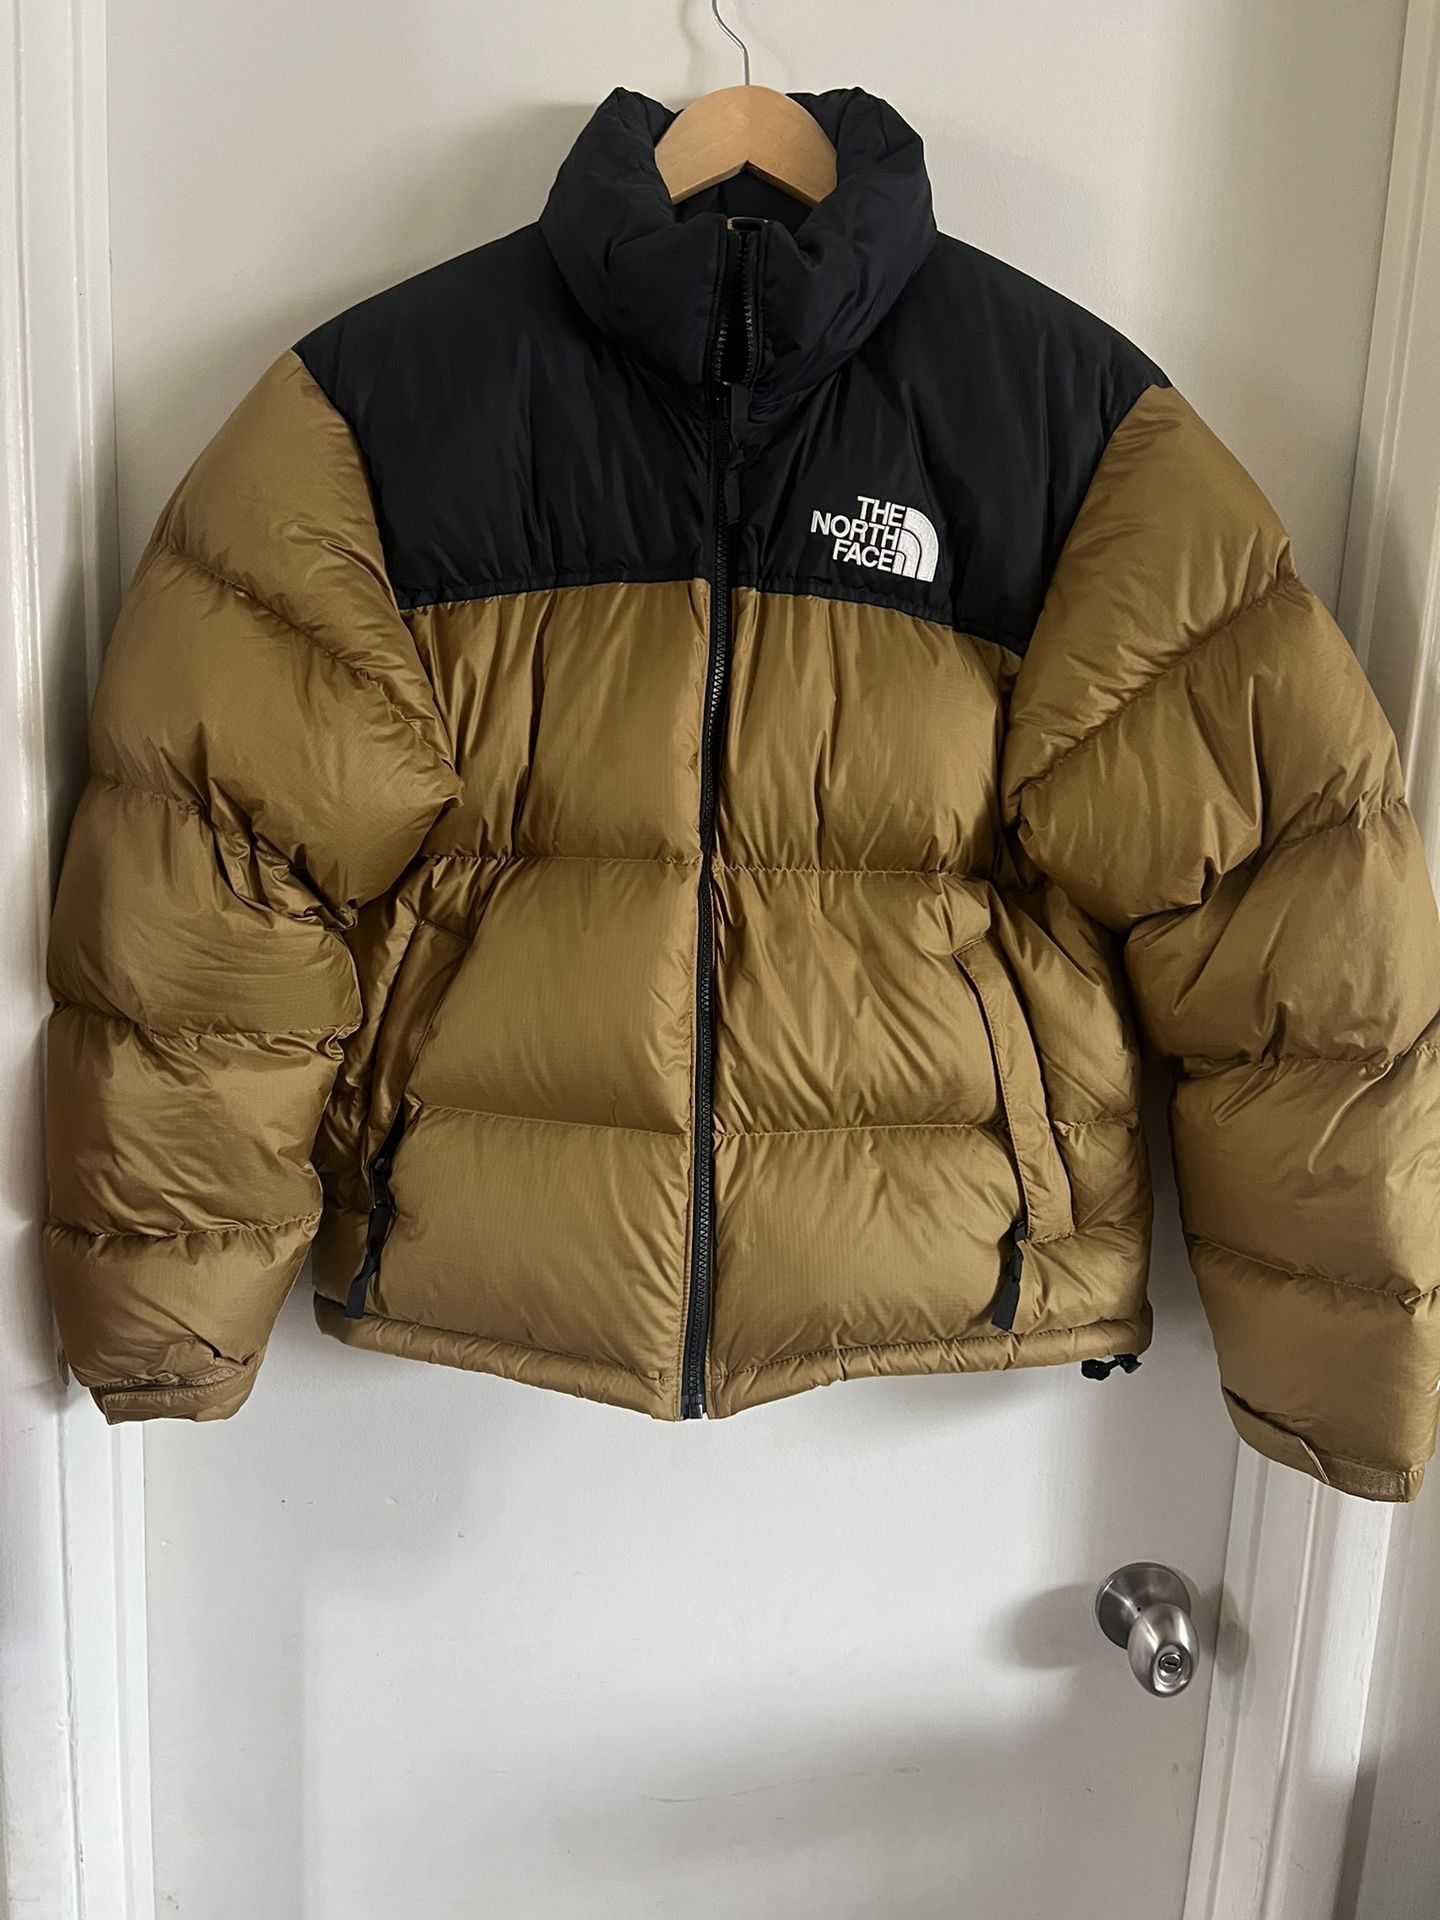 North Face 700 Puff Jacket